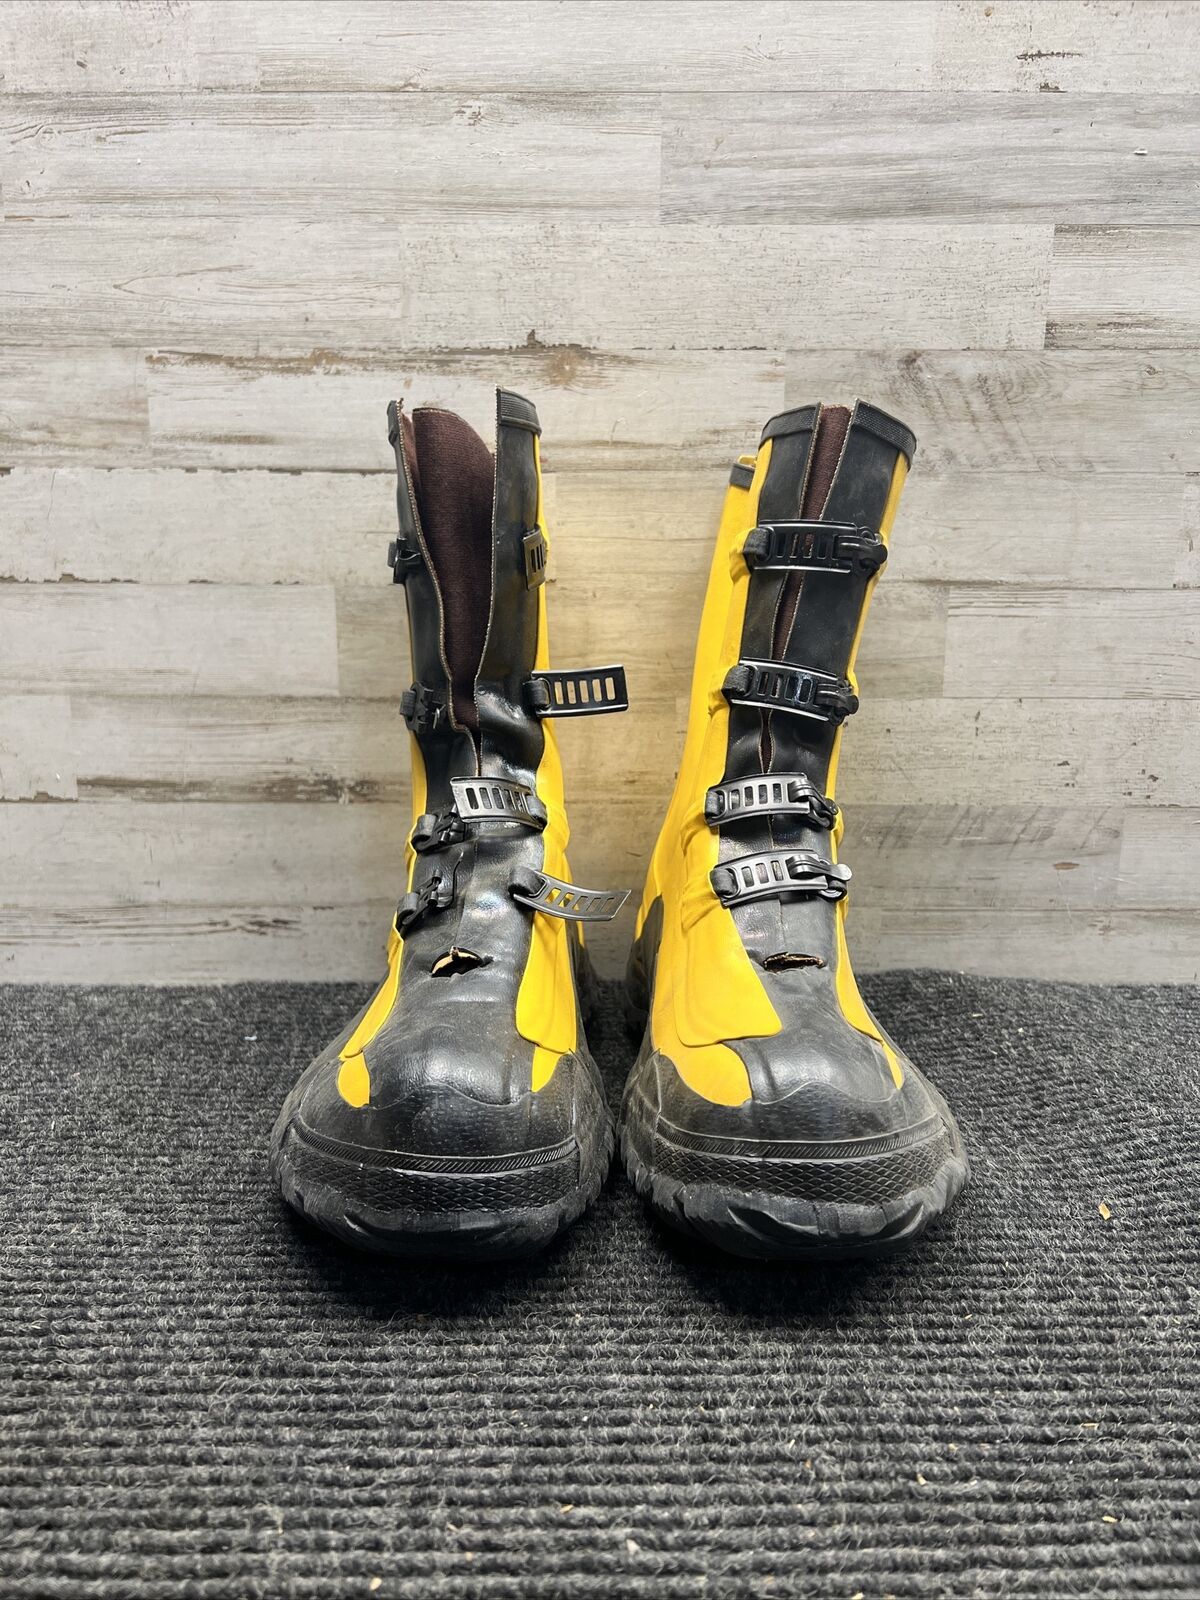 Honeywell 31924 Servus Yellow Rubber Dielectric Boots 4 Buckle Size 8